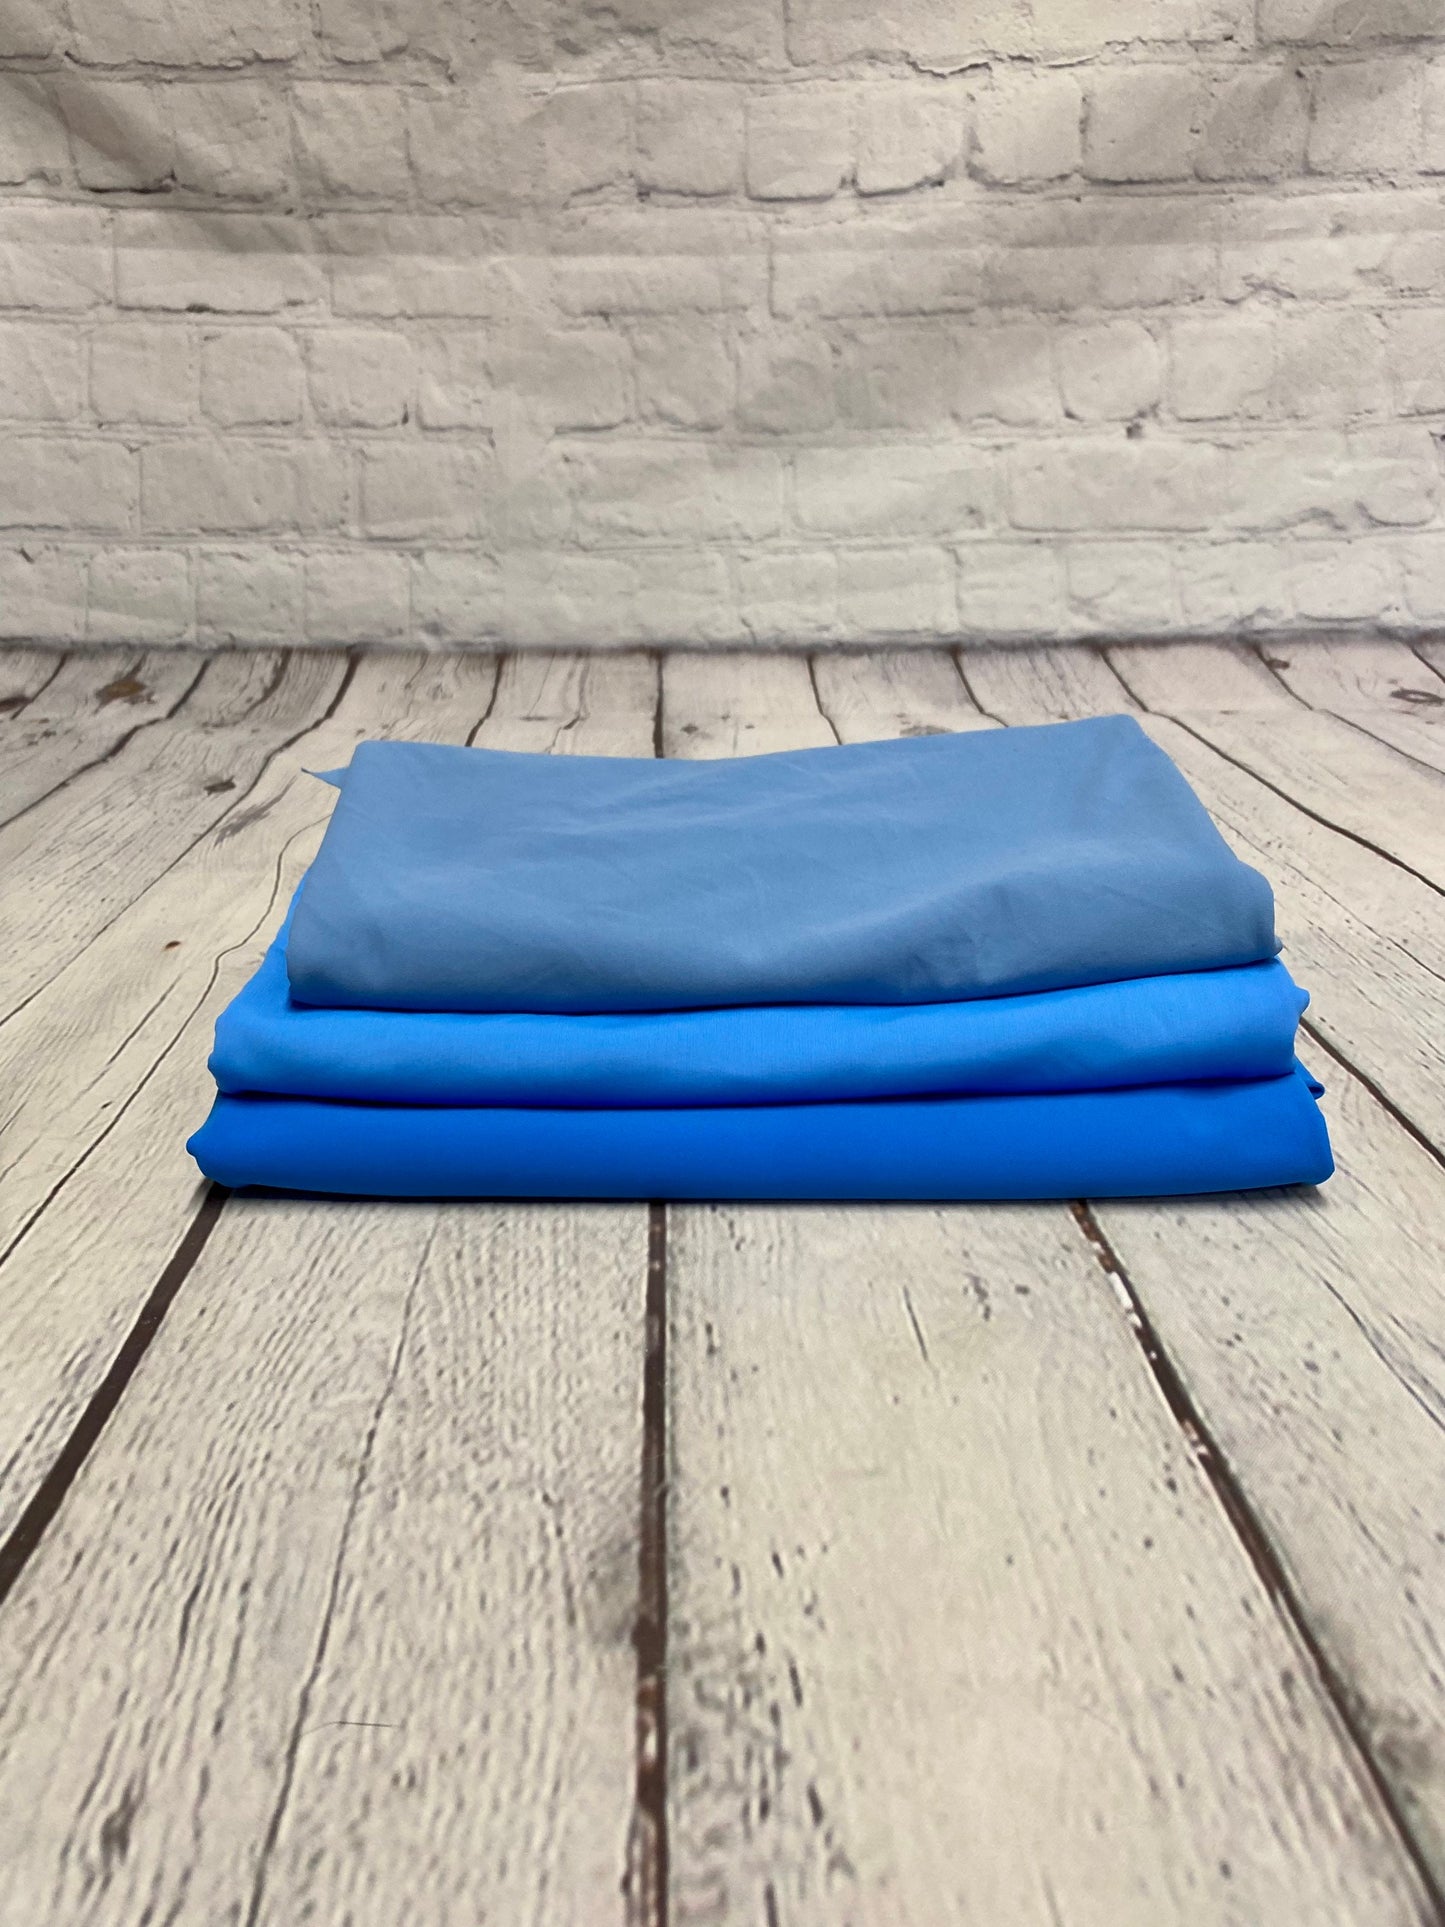 Nylon Spandex Tricot Solid Swimwear Activewear Fabric  By The Yard 220GSM Blue Shades